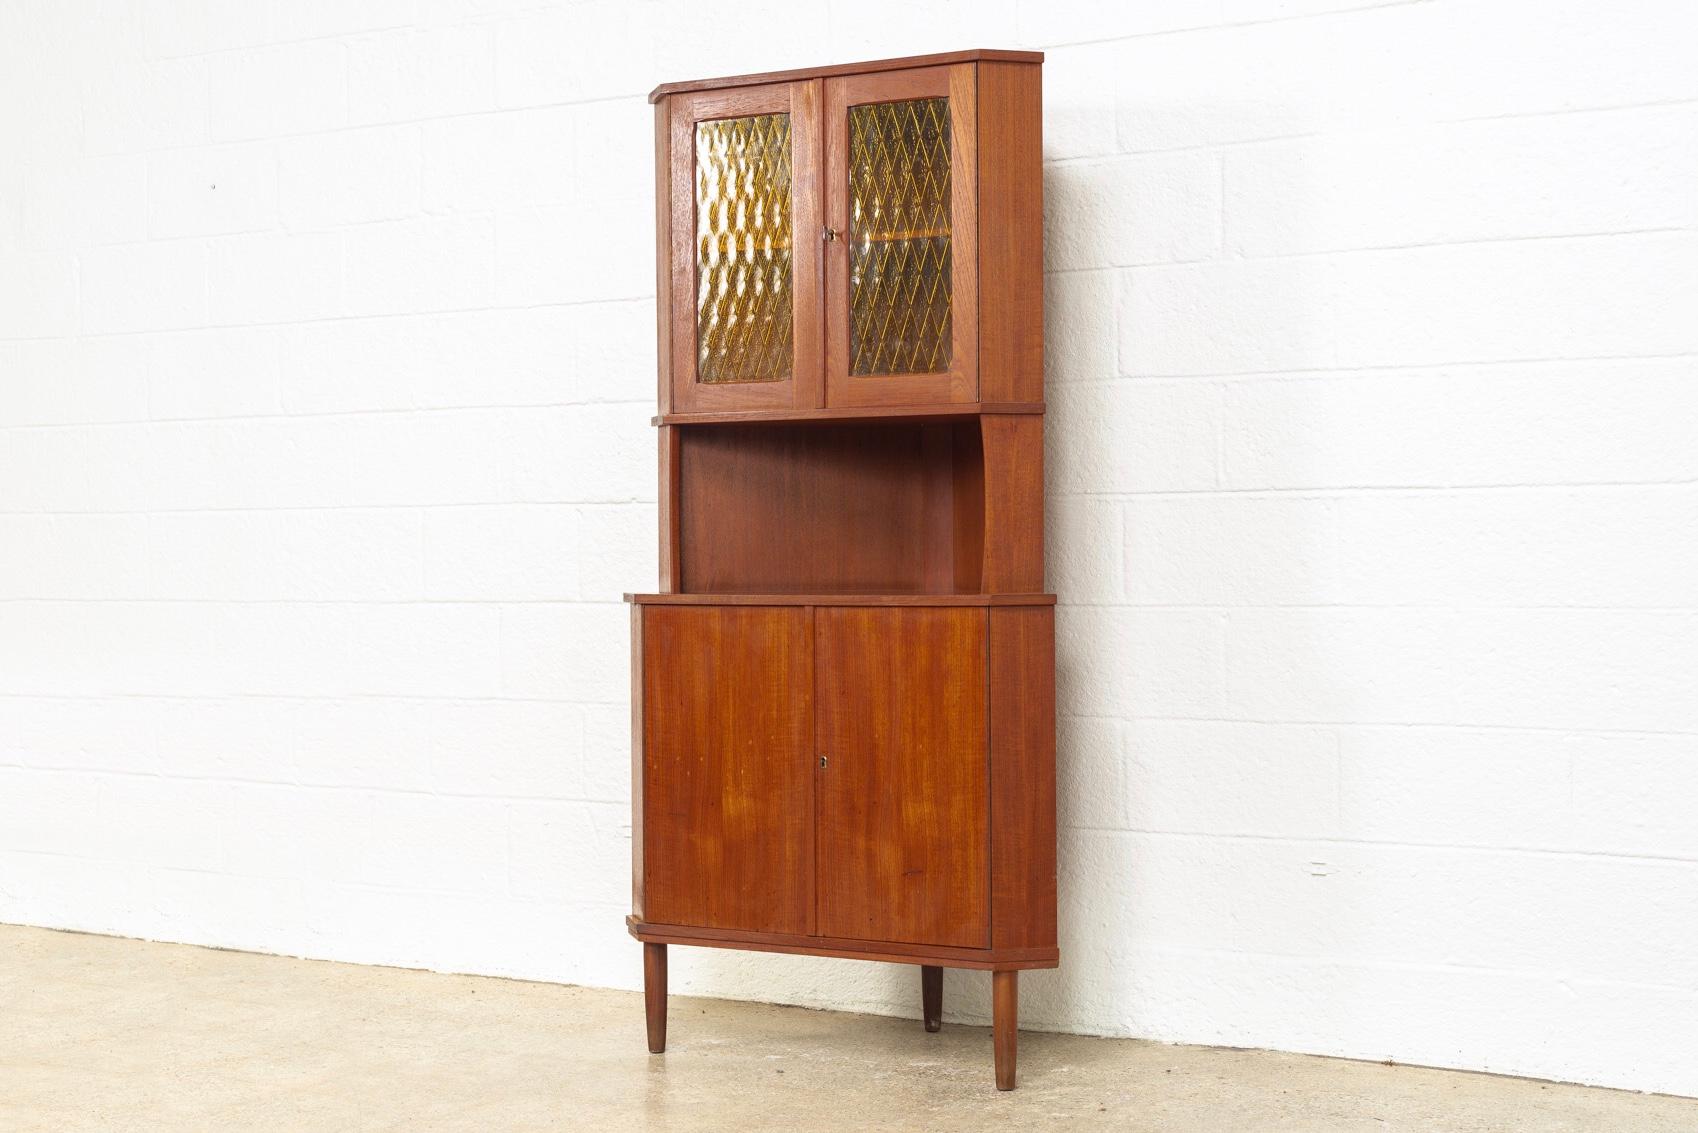 This vintage midcentury Danish modern teak corner cabinet is circa 1960. With classic Danish modern styling the cabinet has clean minimalist lines. This unique corner cabinet features a top hutch with beautiful leaded amber glass doors and one